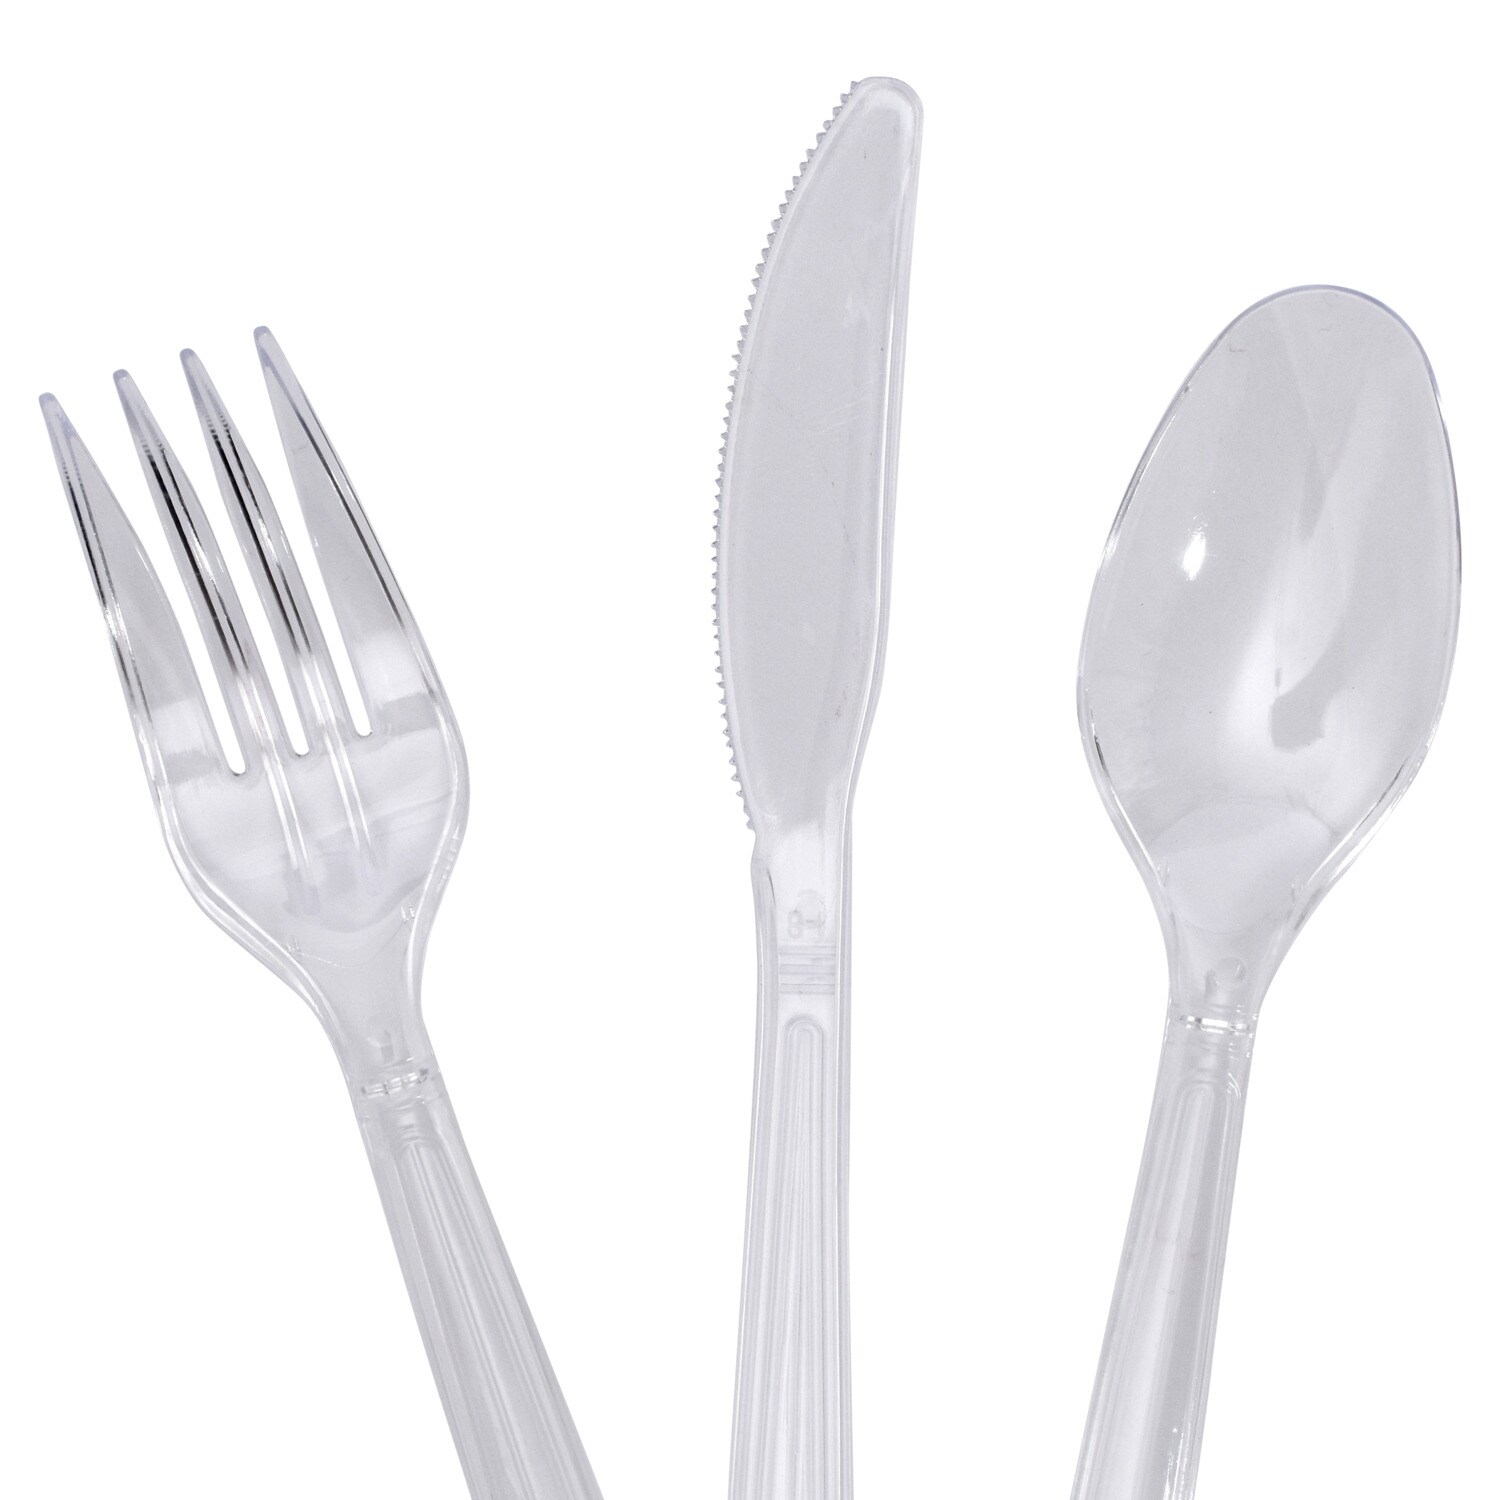 16 forks great for parties FREE DELIVERY 48 CLEAR ASSORTED RE-USEABLE PLASTIC CUTLERY SET 16 knives 16 spoons